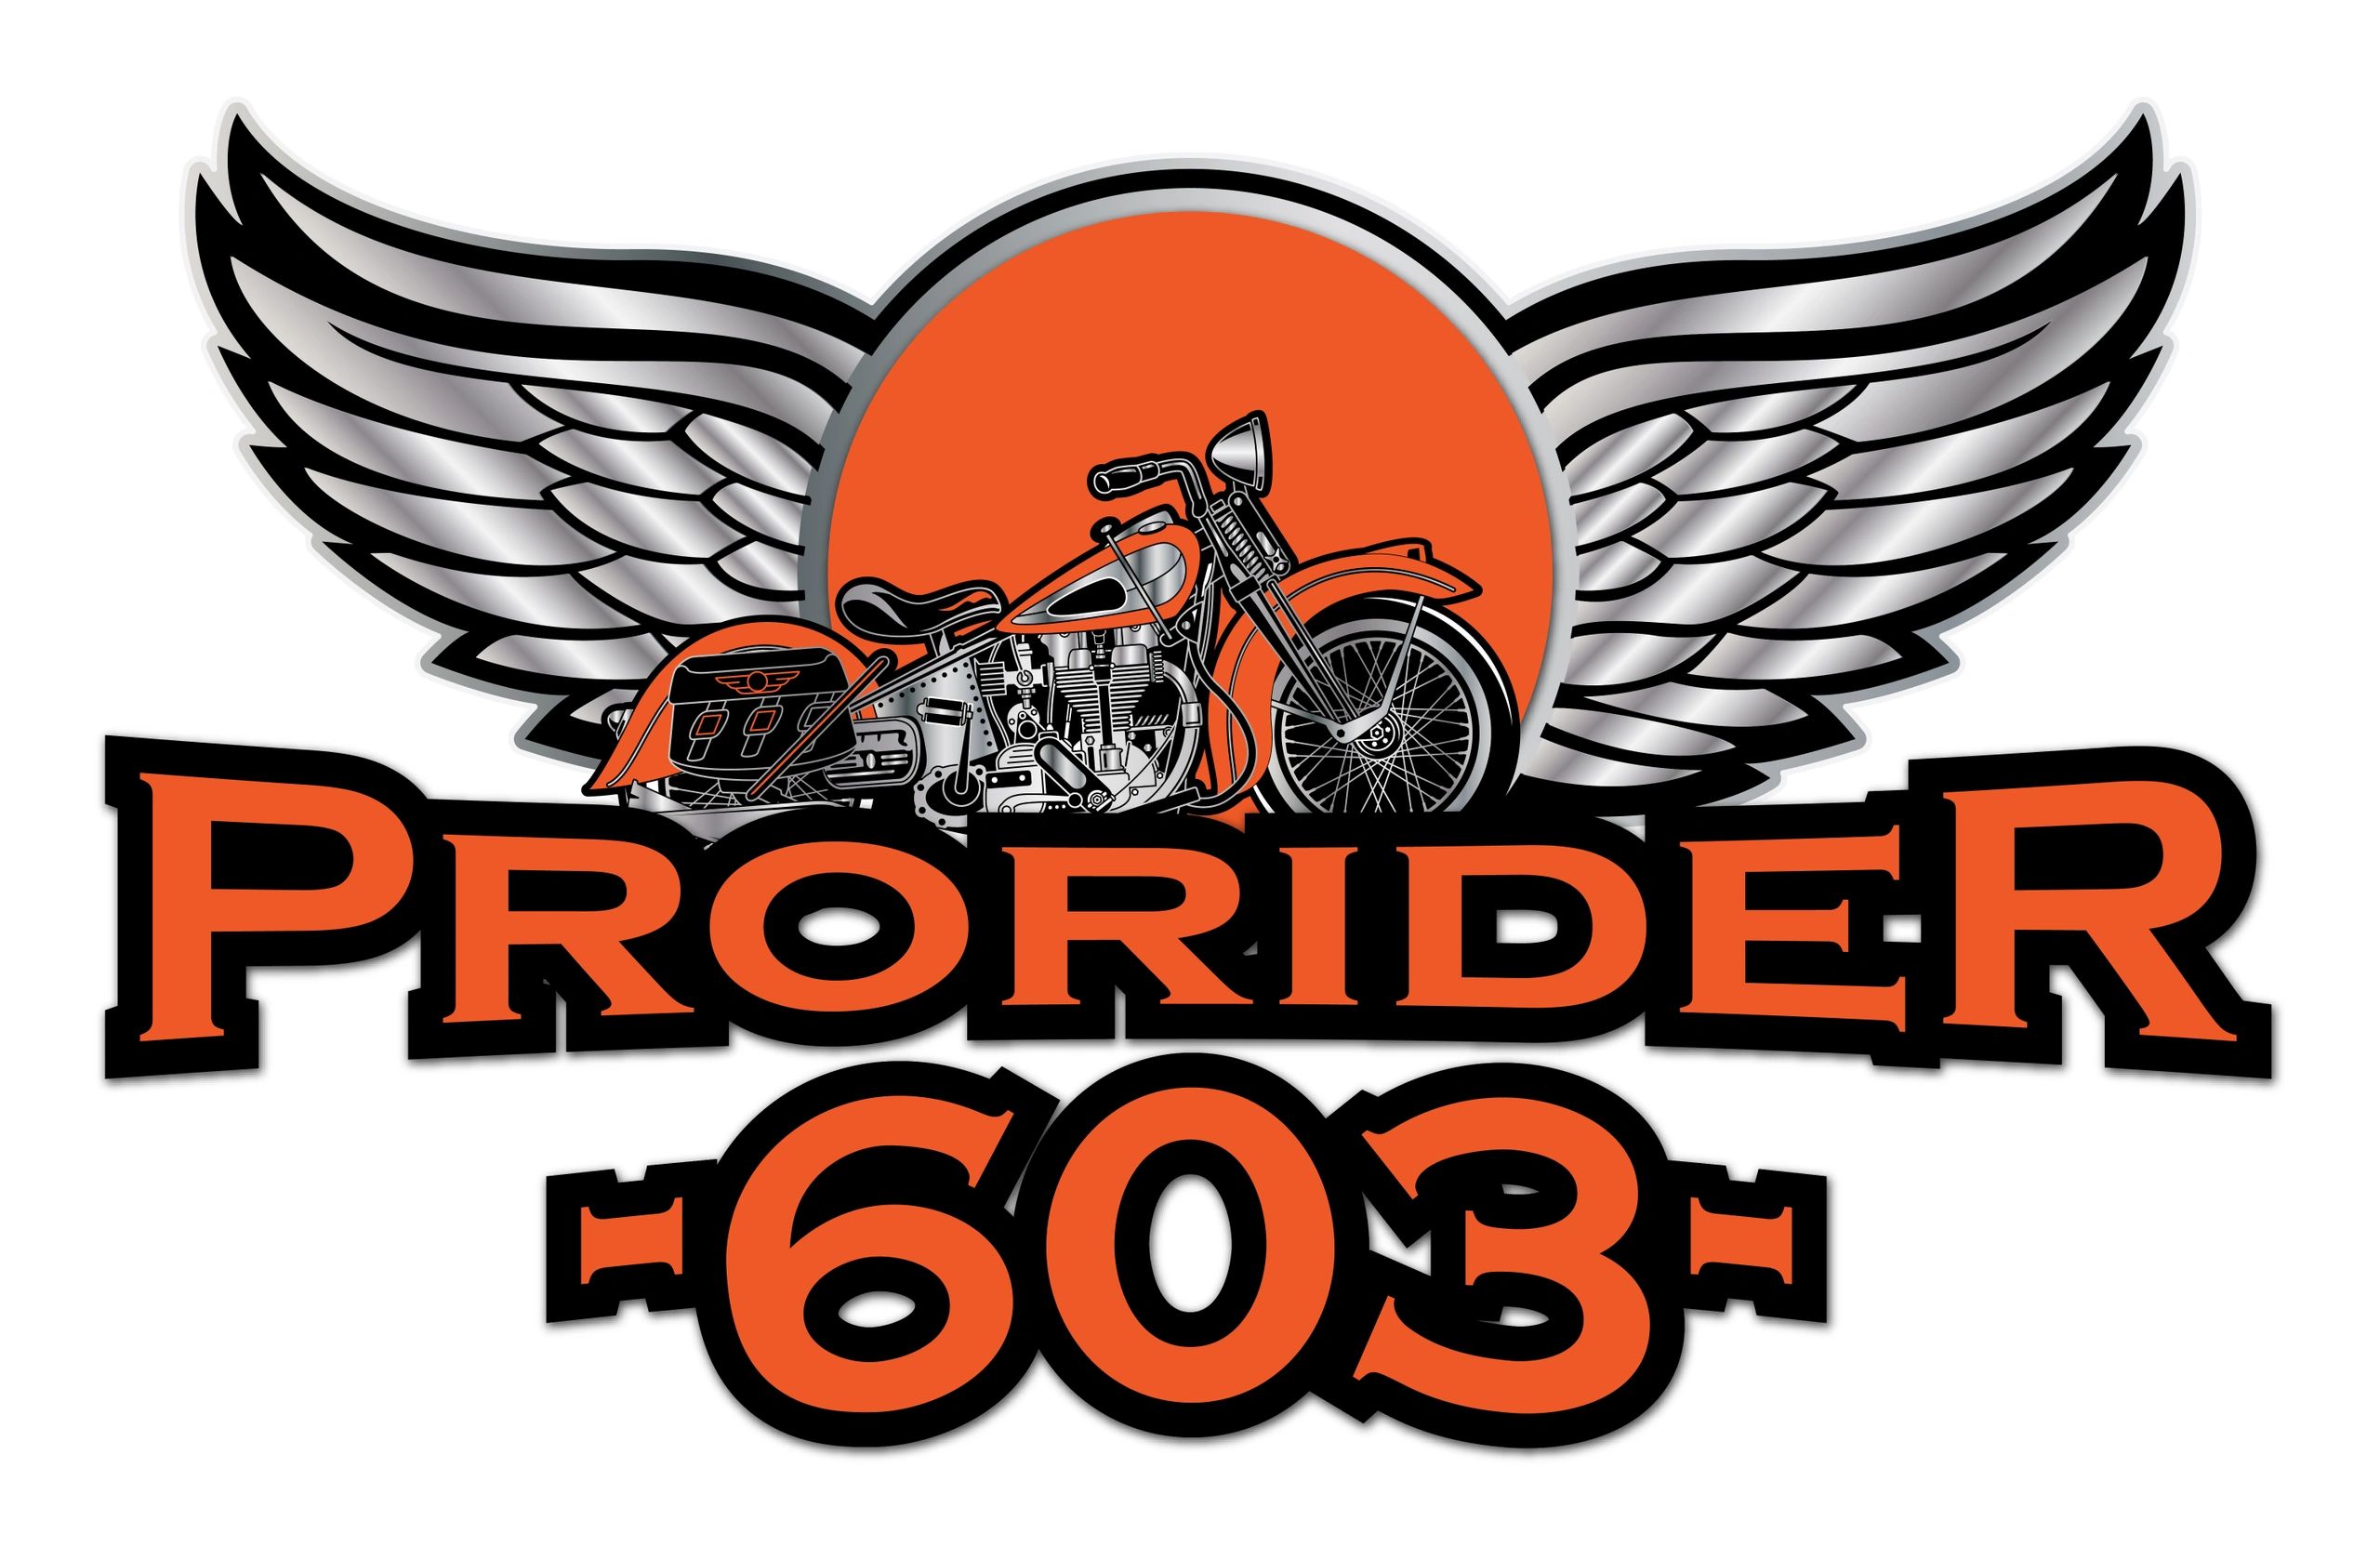 ProRider 603 Advanced Motorcycle Training and 603 Motorsports Repair shop